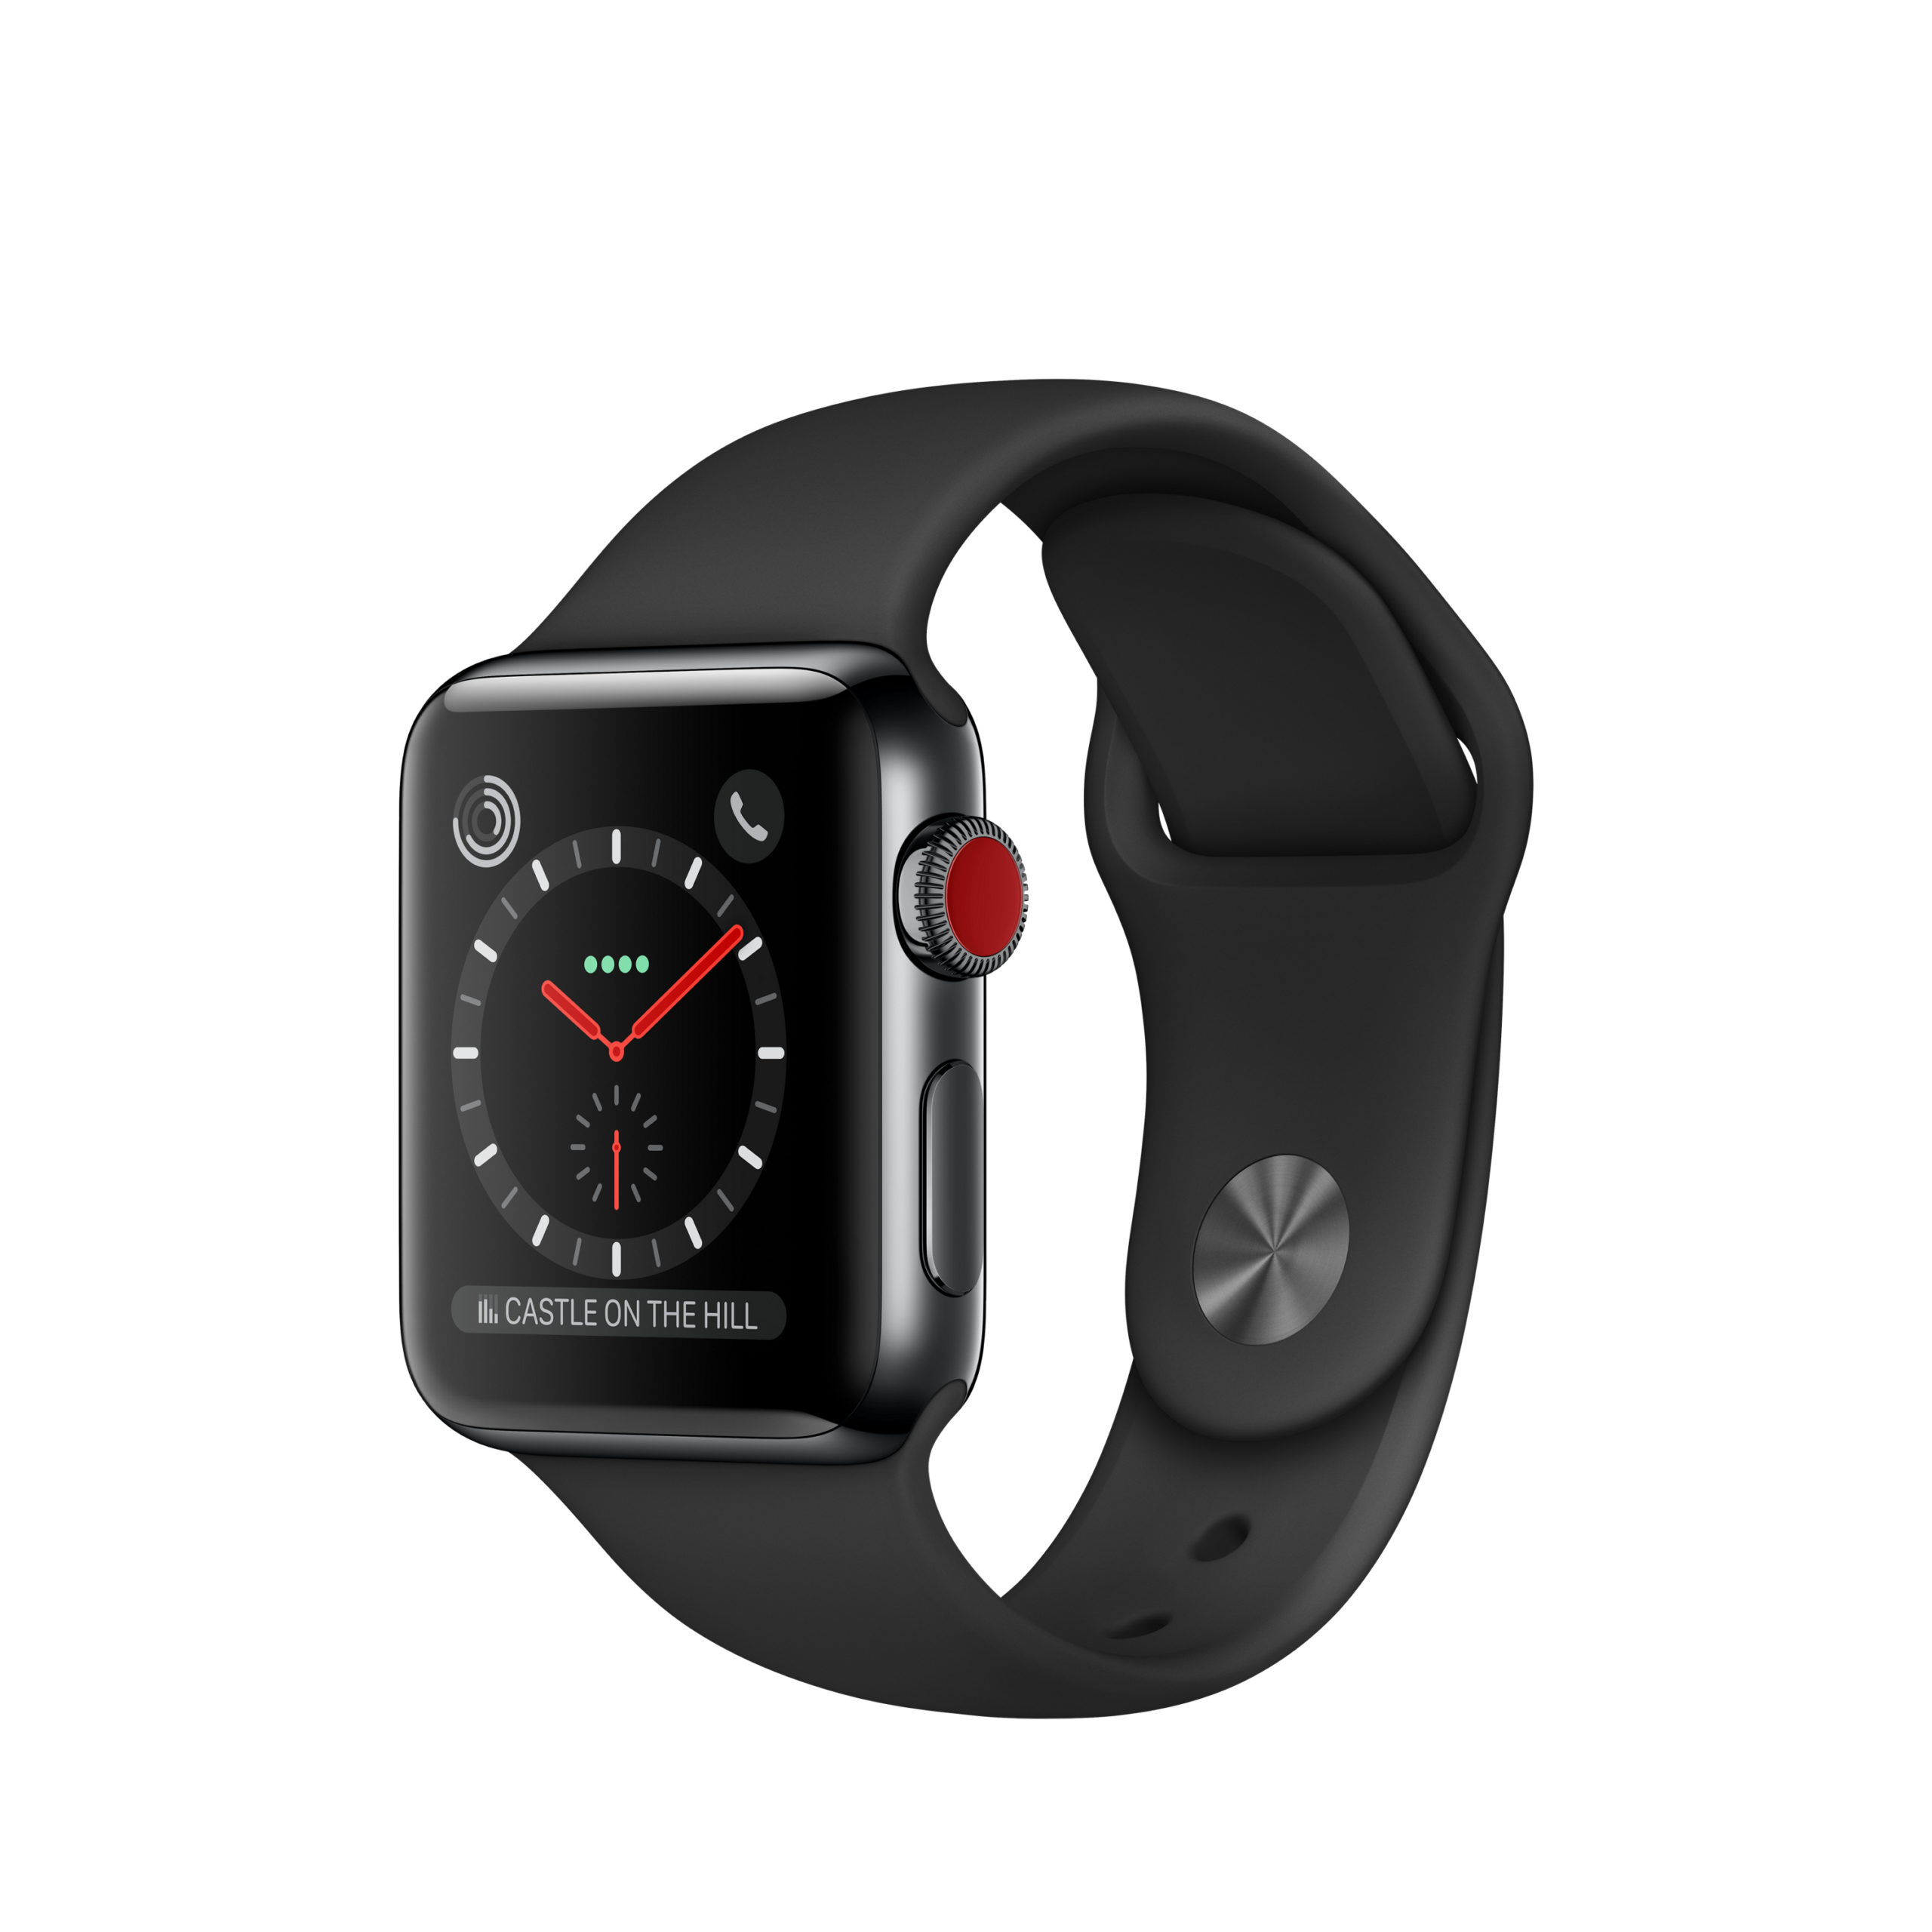 MQJW2LL/A - $173 - Apple Watch Series 3 38mm GPS + Cellular Space BLACK